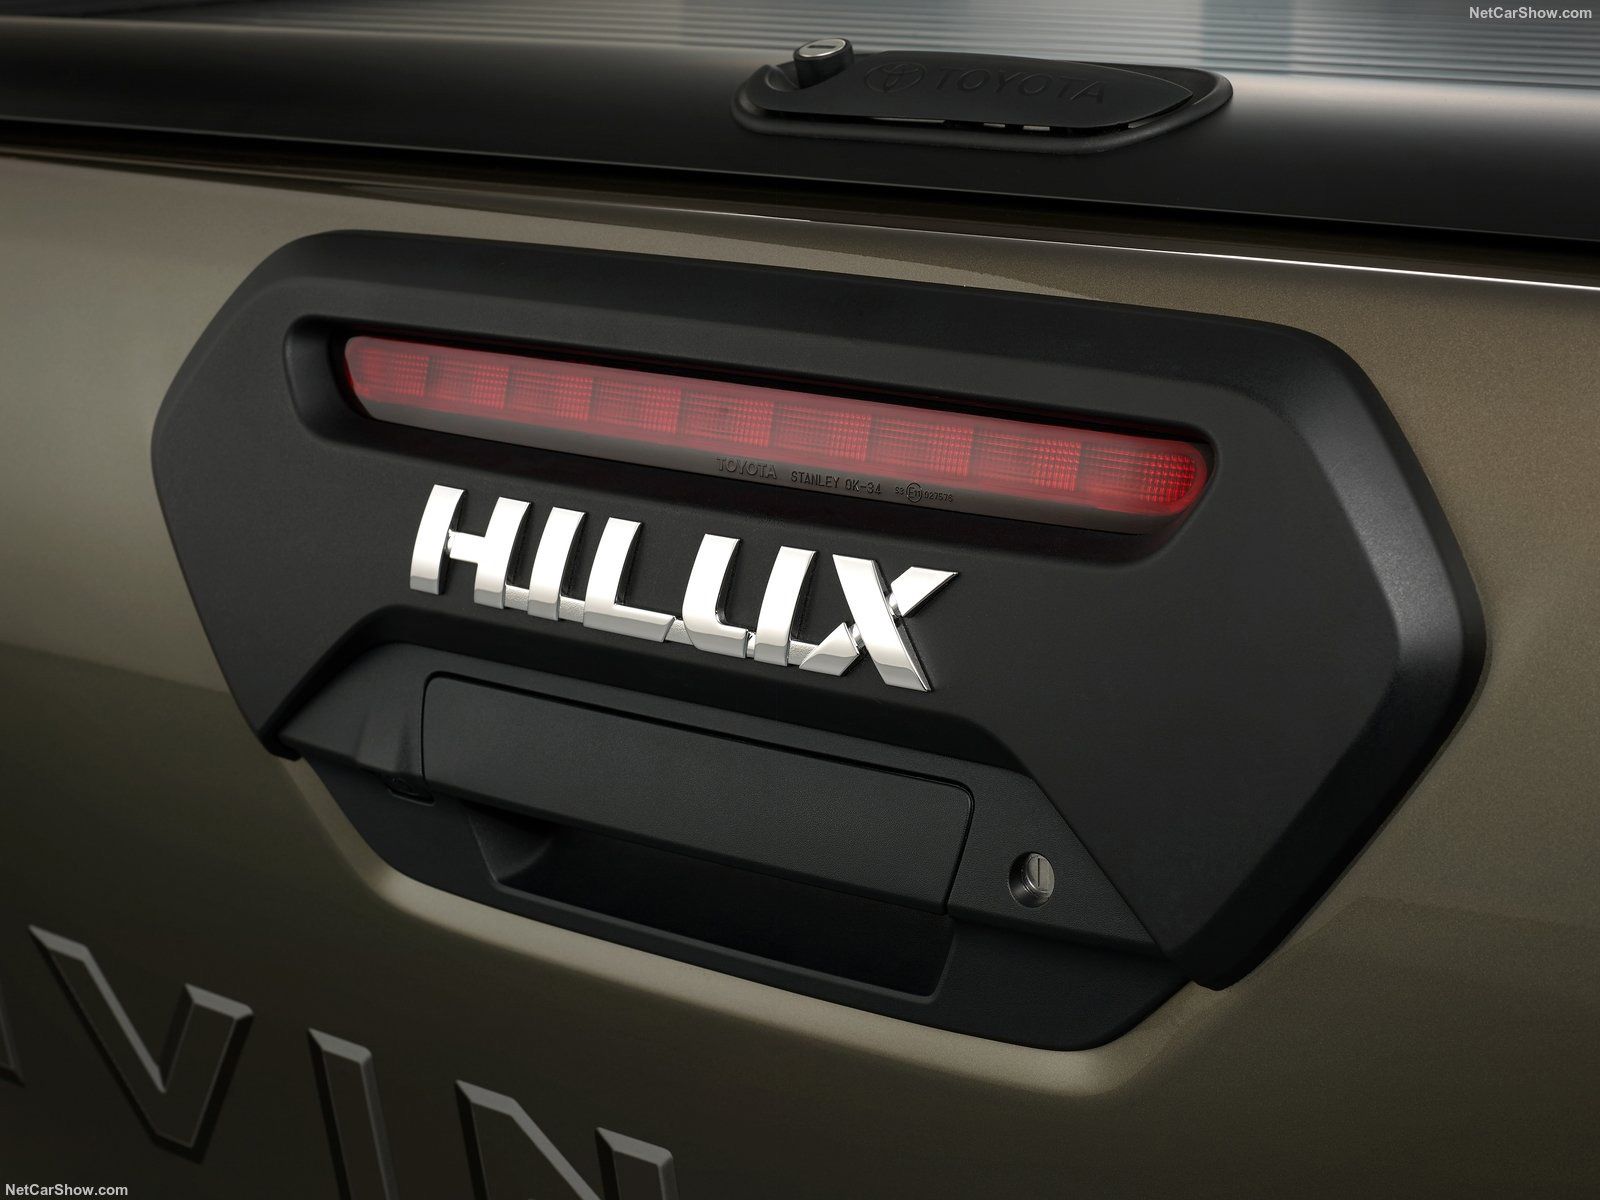 Toyota Hilux Name Plate